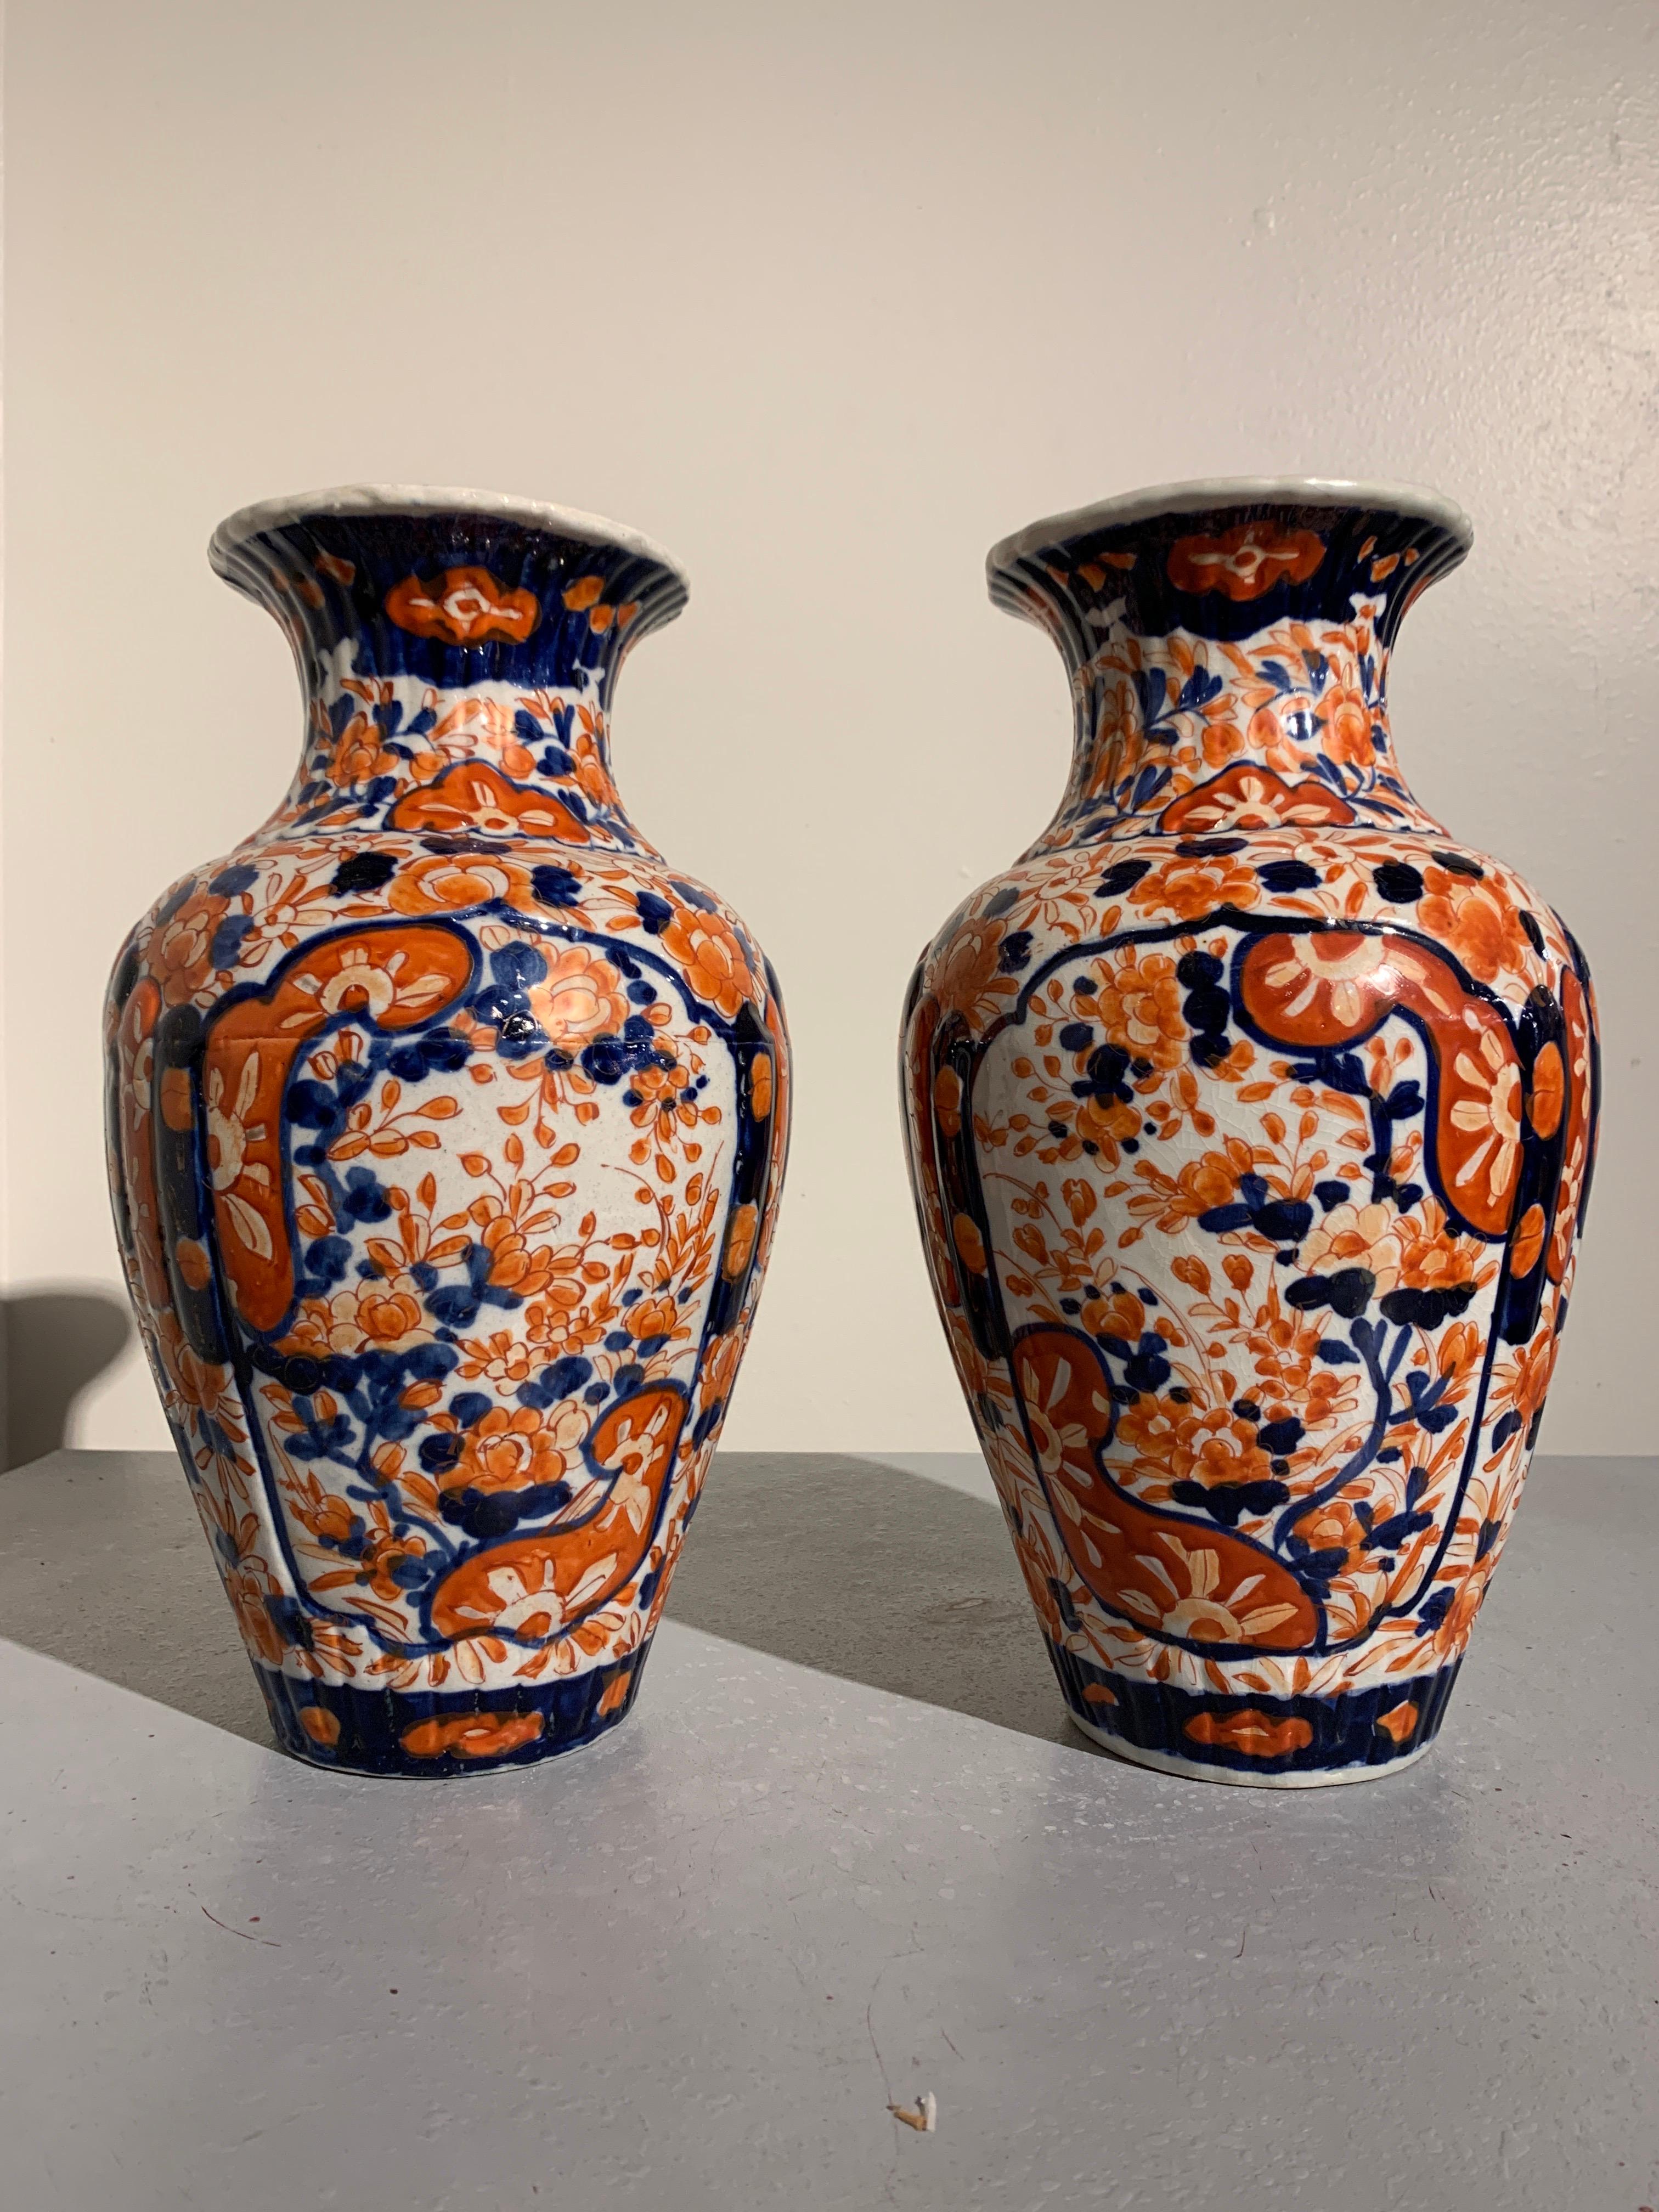 A lovely pair of Japanese Meiji period Imari vases, circa 1900.

The vases with fluted bodies of baluster form rising to a flaring mouth. The vases decorated with a dense flora design in the typical imari color palette of cobalt blue and burnt